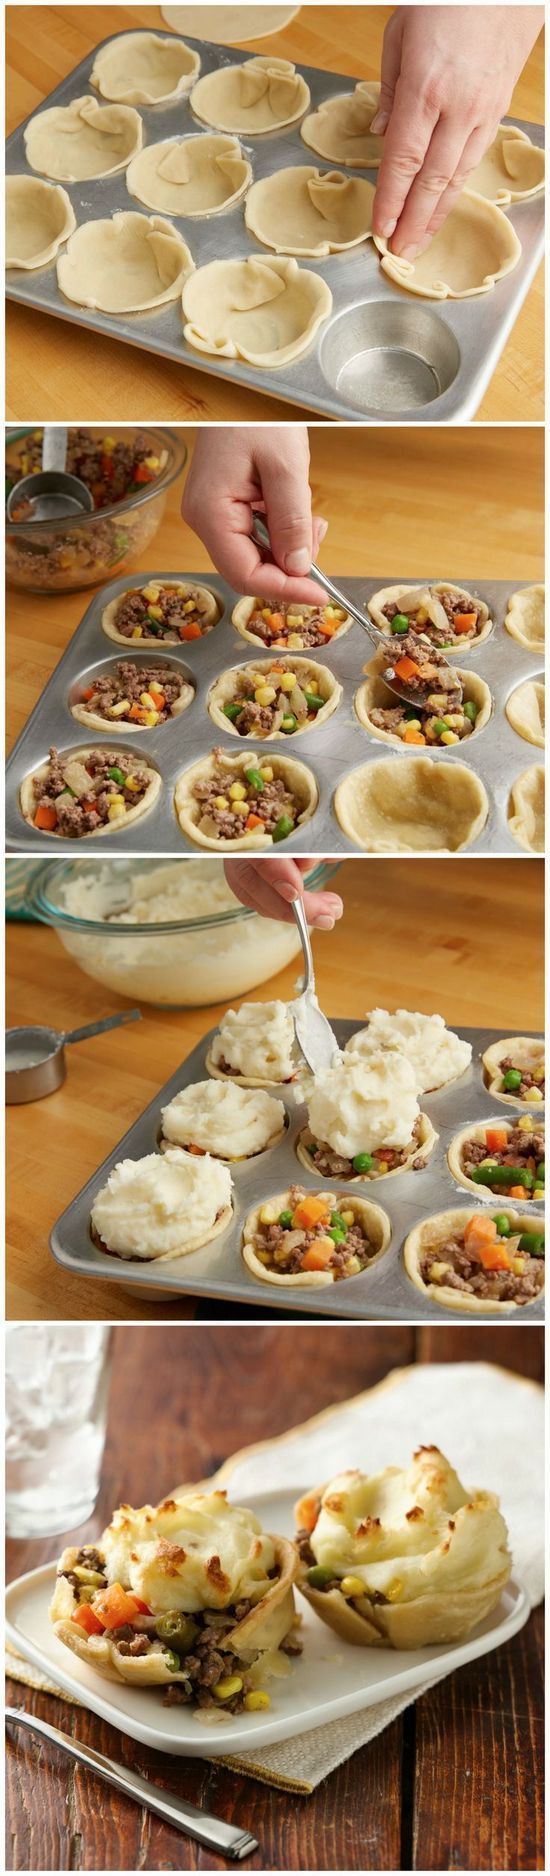 Mini Shepherd’s Pot Pies | Mini shepherd’s pies are sure to be a new family favorite recipe! Use purchased or leftover mashed